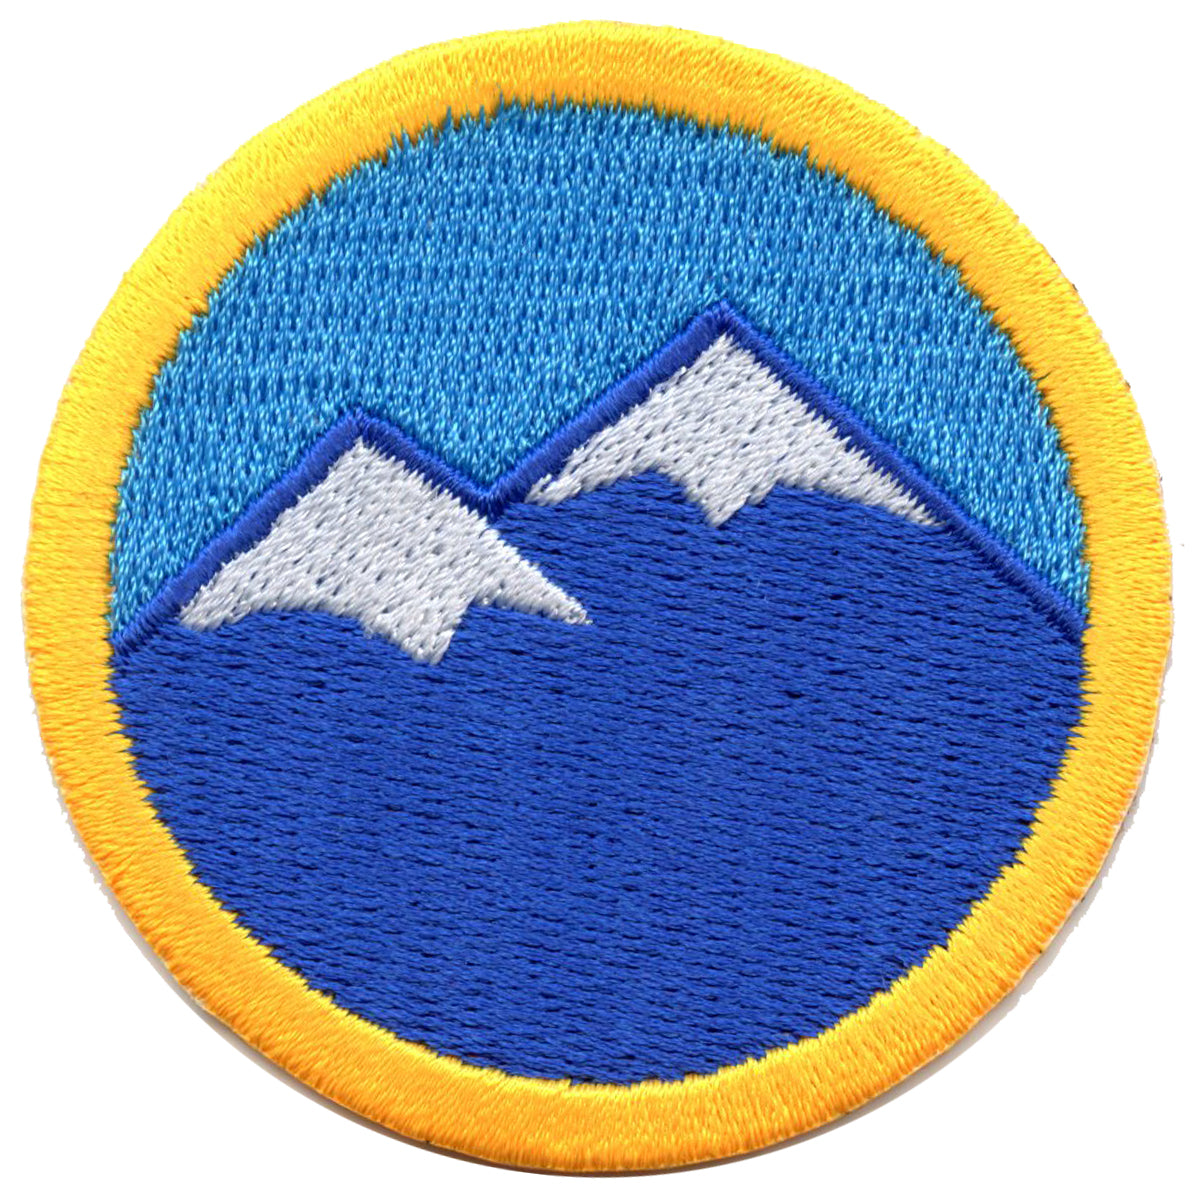 Get Scout Patches on For GOOD! Badge Magic 3 Easy Steps! 